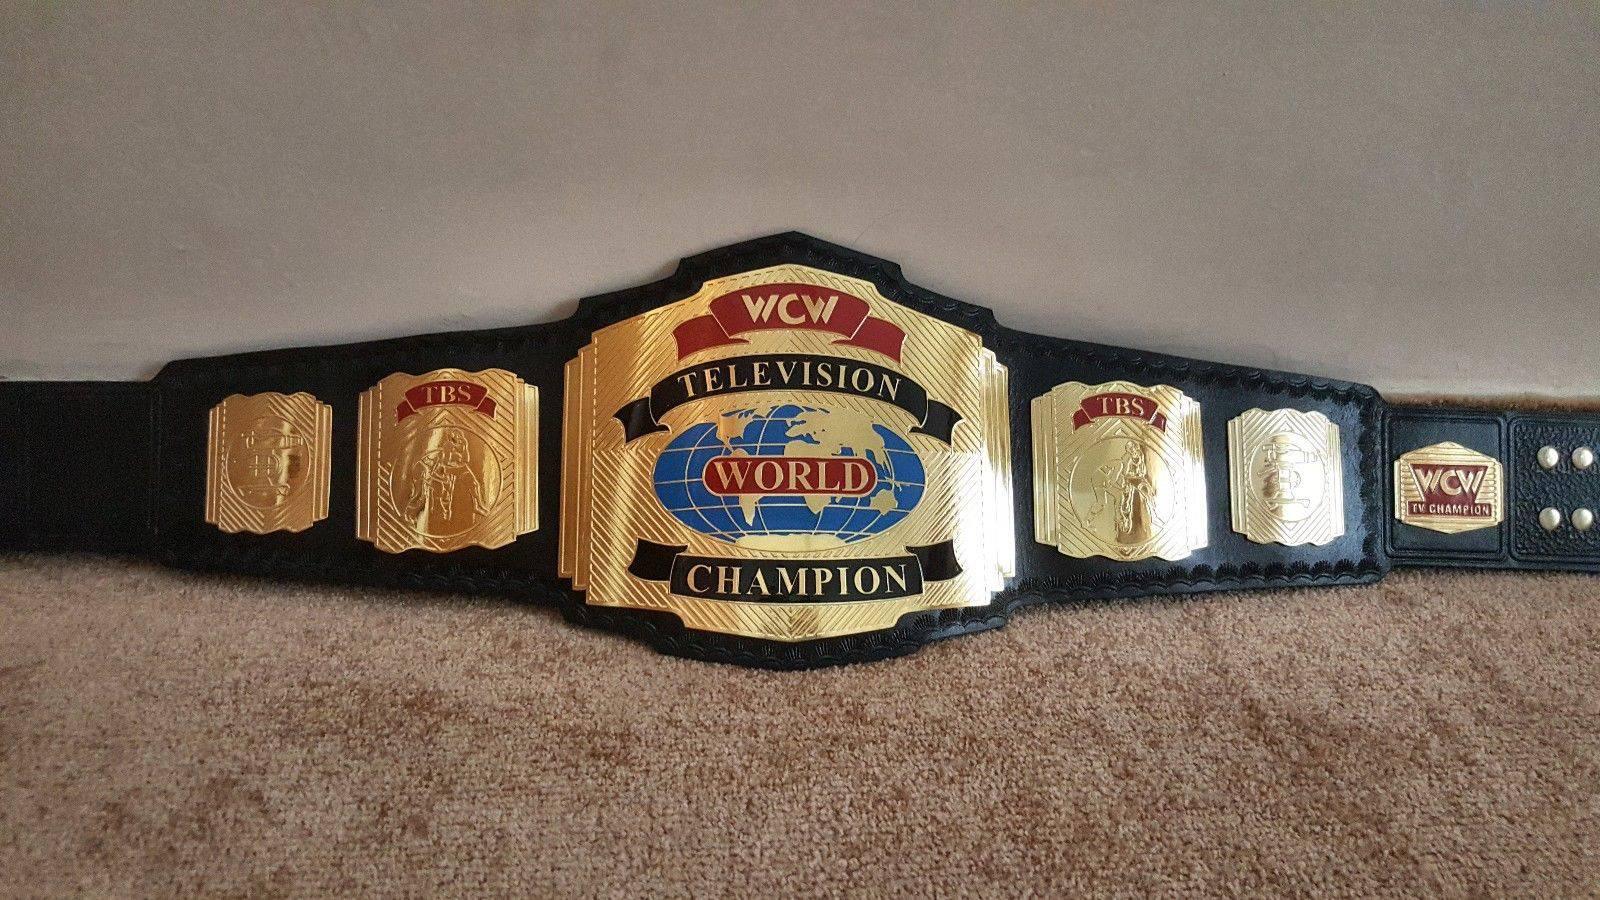 AEW TBS Championship Wrestling Belt Limited Collectors Pin